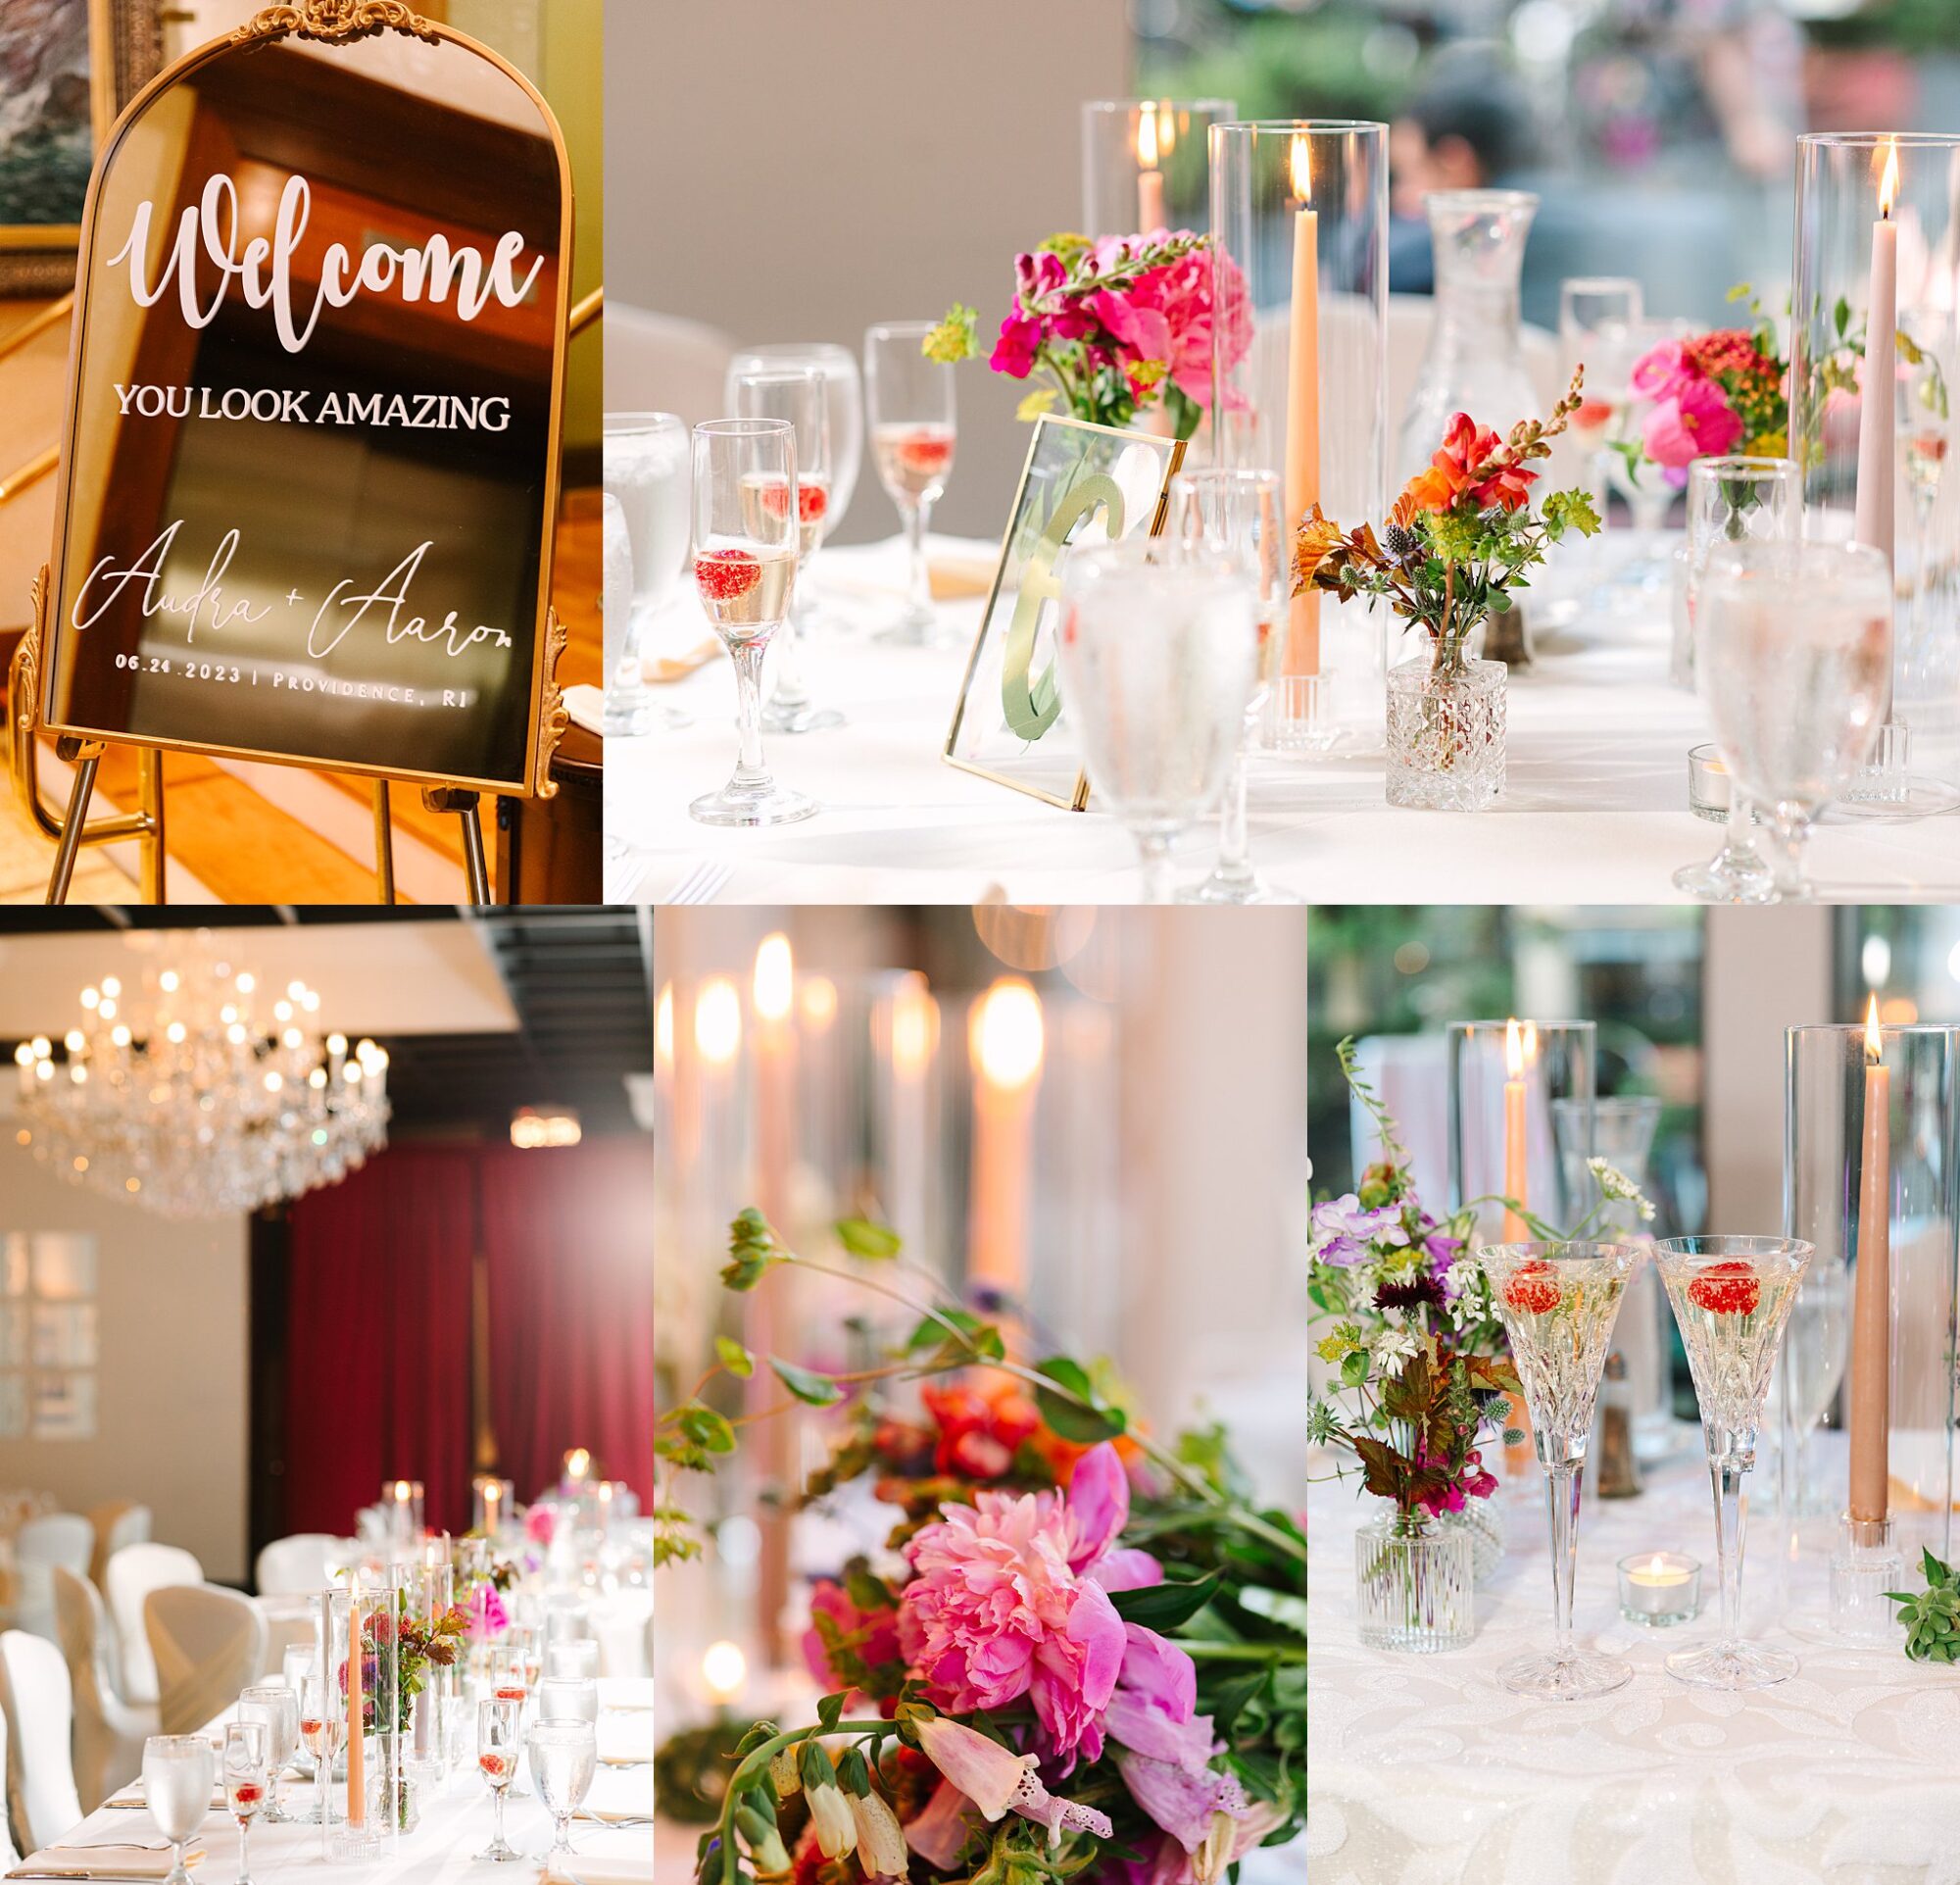 HOtel Providence wedding reception chandeleirs and jewel tones florals